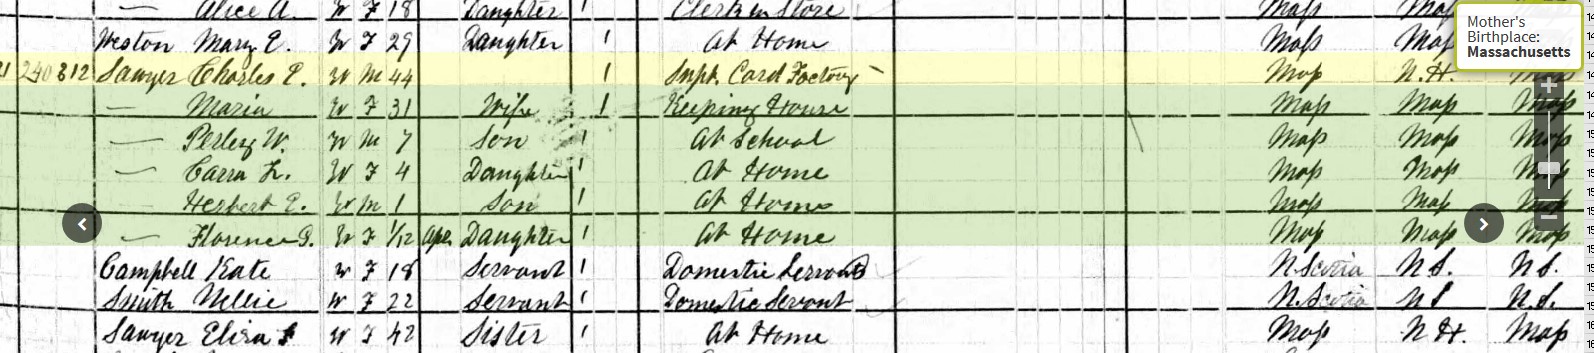 1880 census Charles familly.jpg